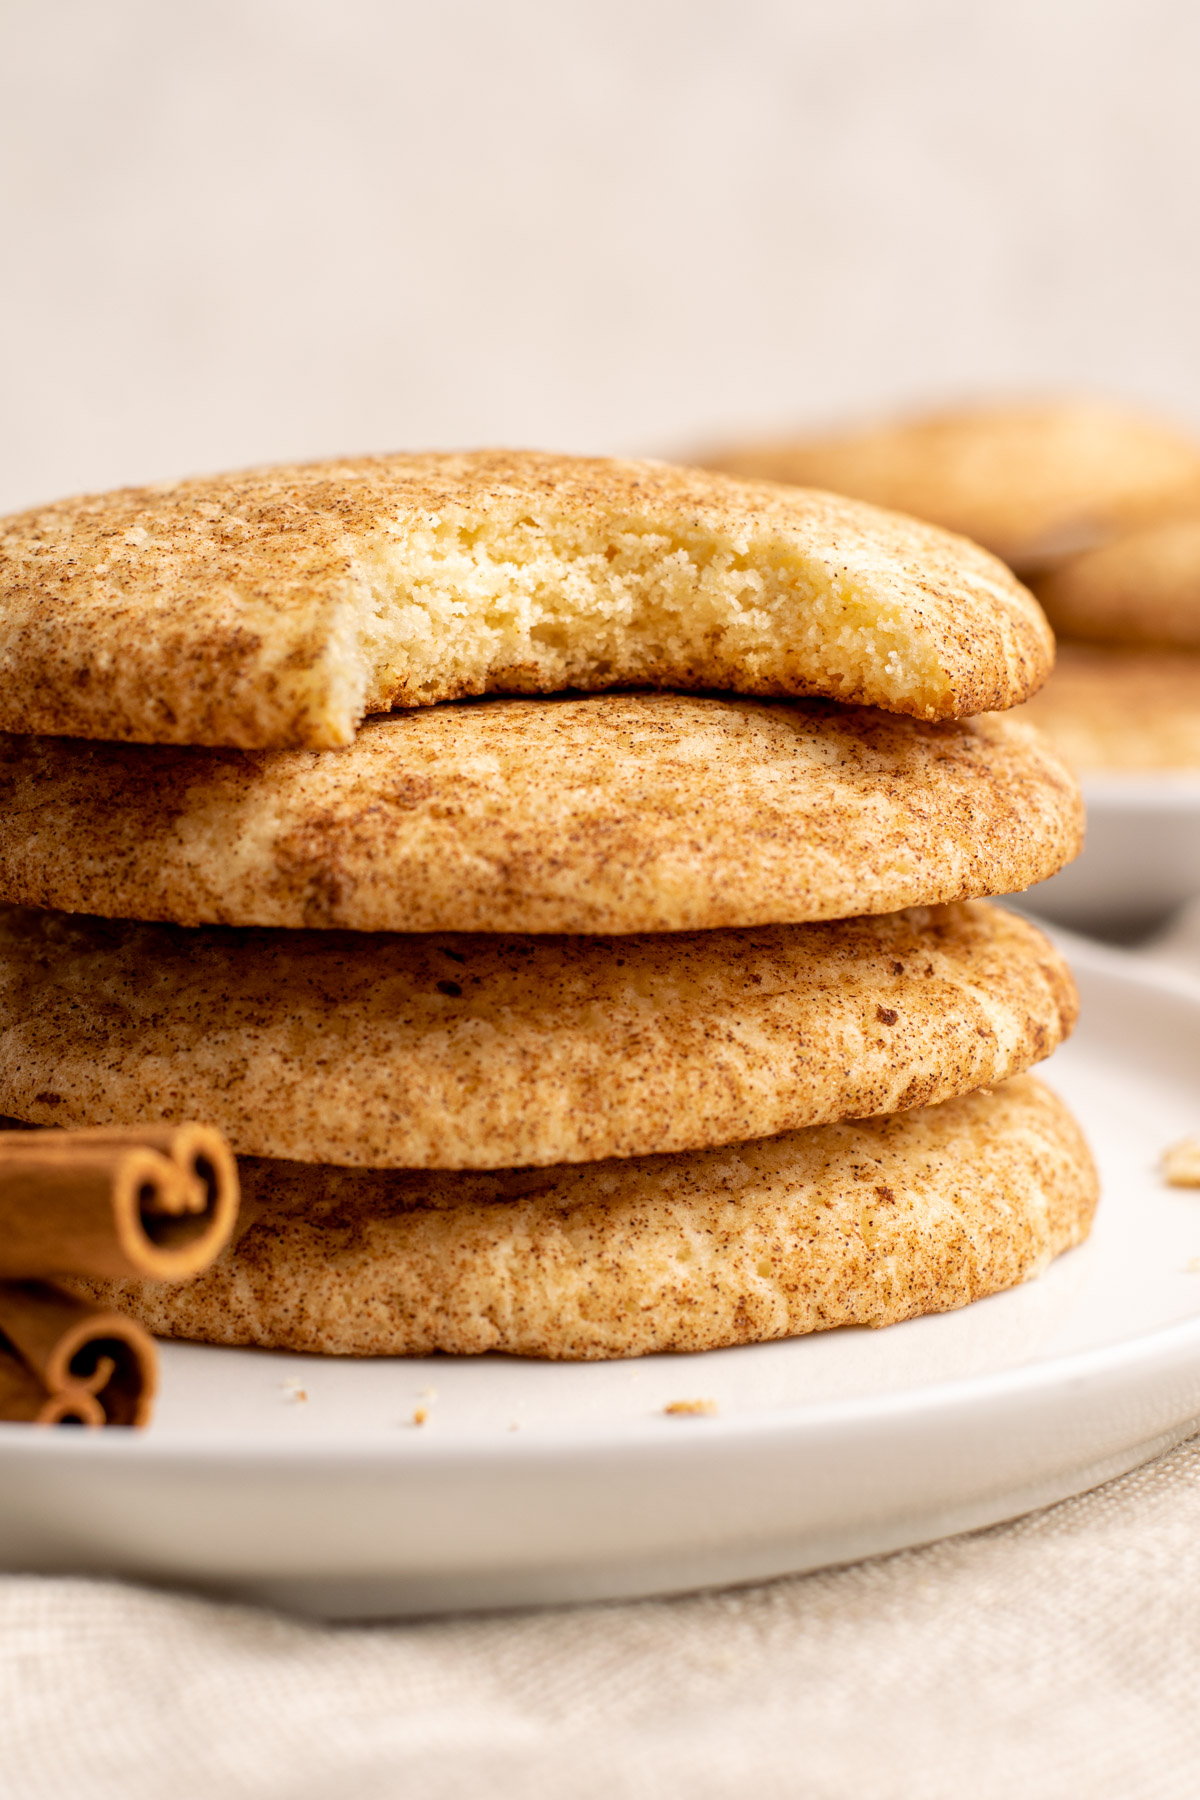 stack of 4 gluten free snickerdoodle cookies, the top one with a bite missing.